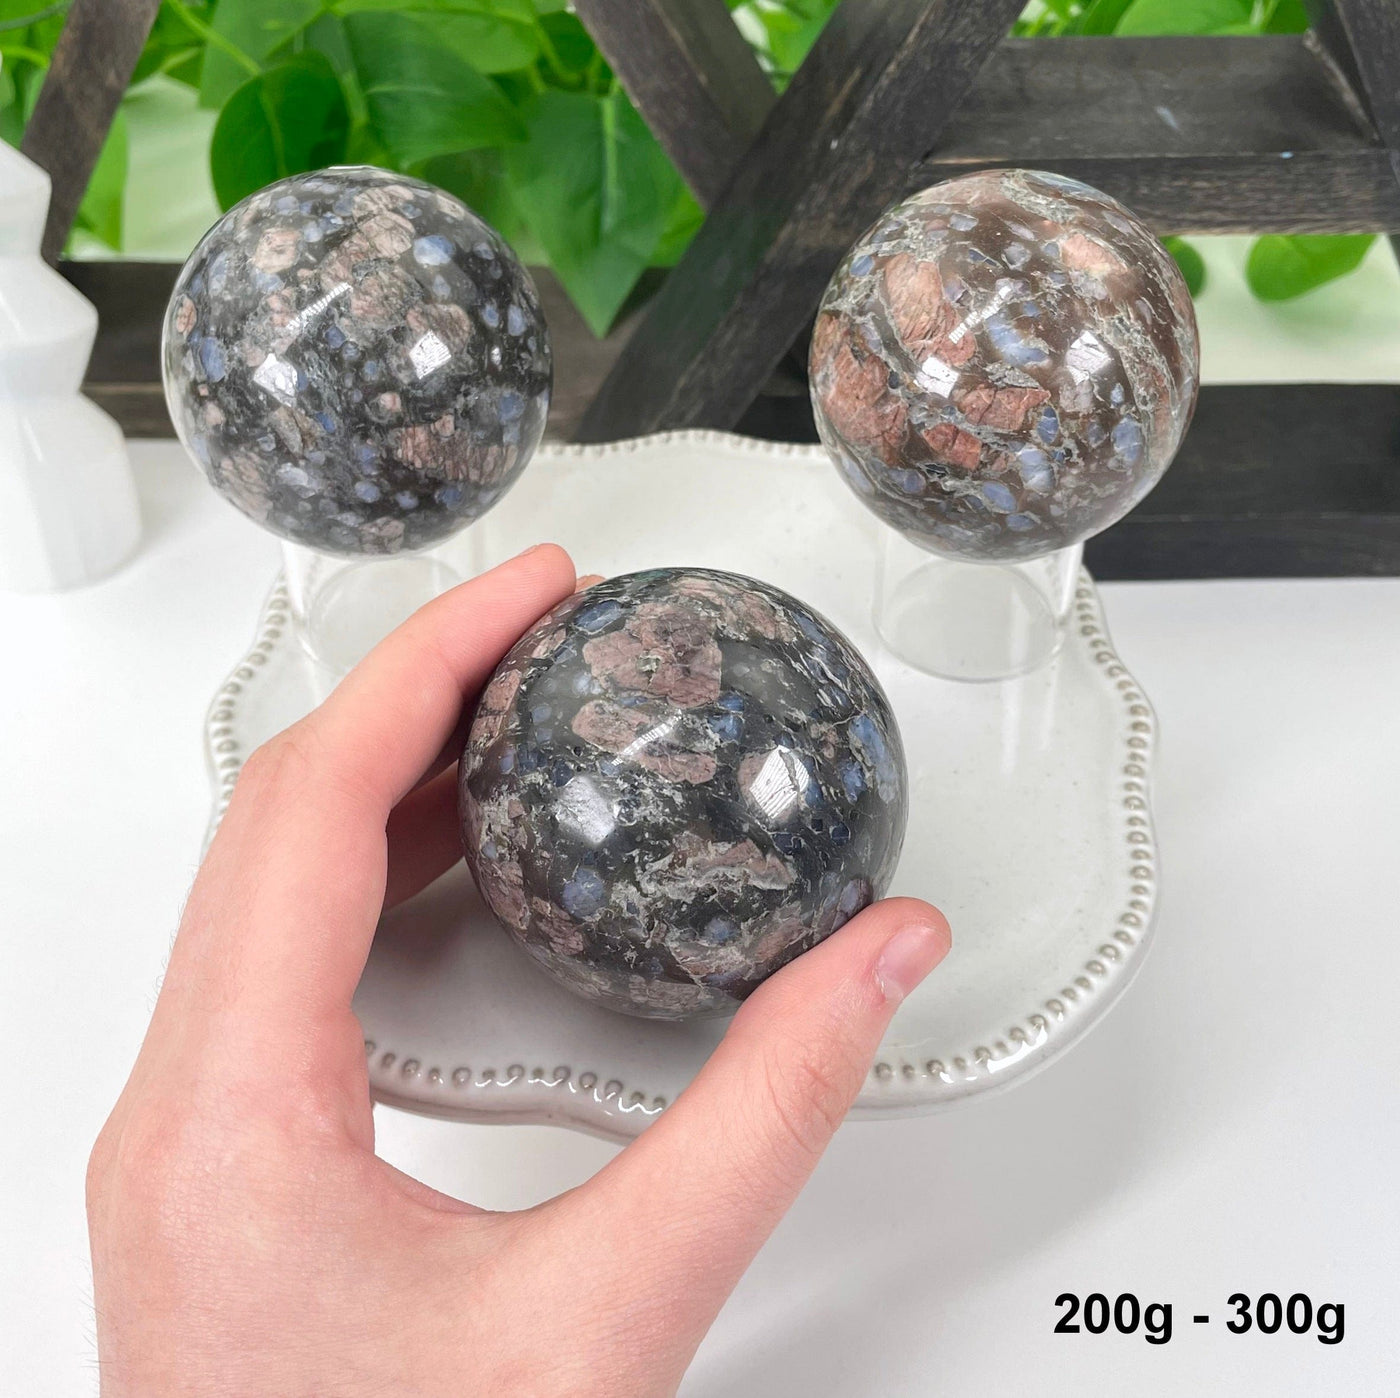 three 200g - 300g rhyolite polished spheres on display in front of backdrop for possible variations with one in hand for size reference